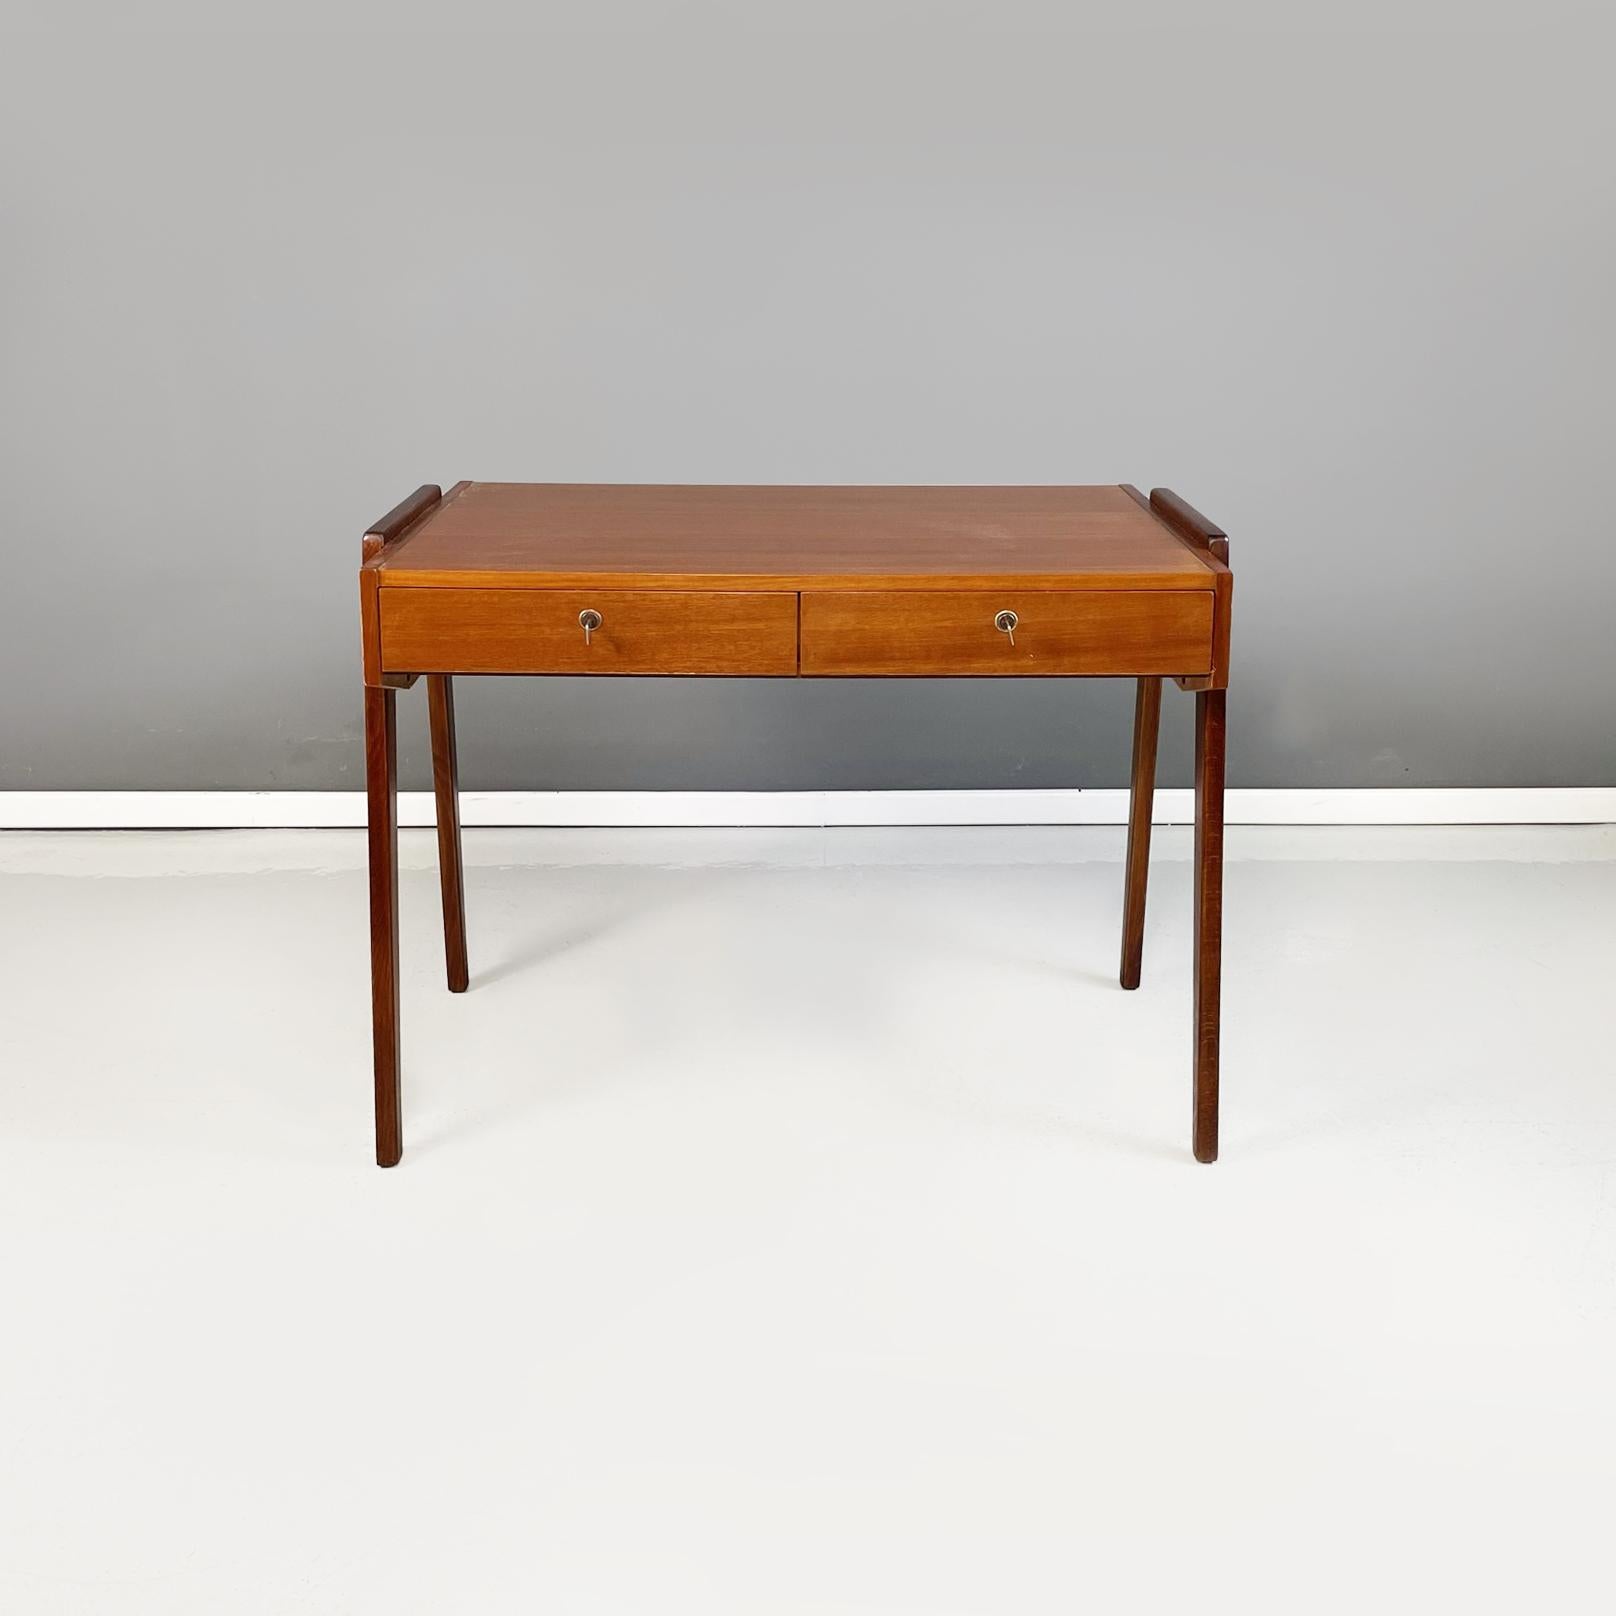 German midcentury Wooden desk with drawers and brass details, 1960s
Desk with rectangular top, entirely in wood. On the front it has two drawers with keys. The table structure is made up of 4 round section legs with brass details.
1960s. of German